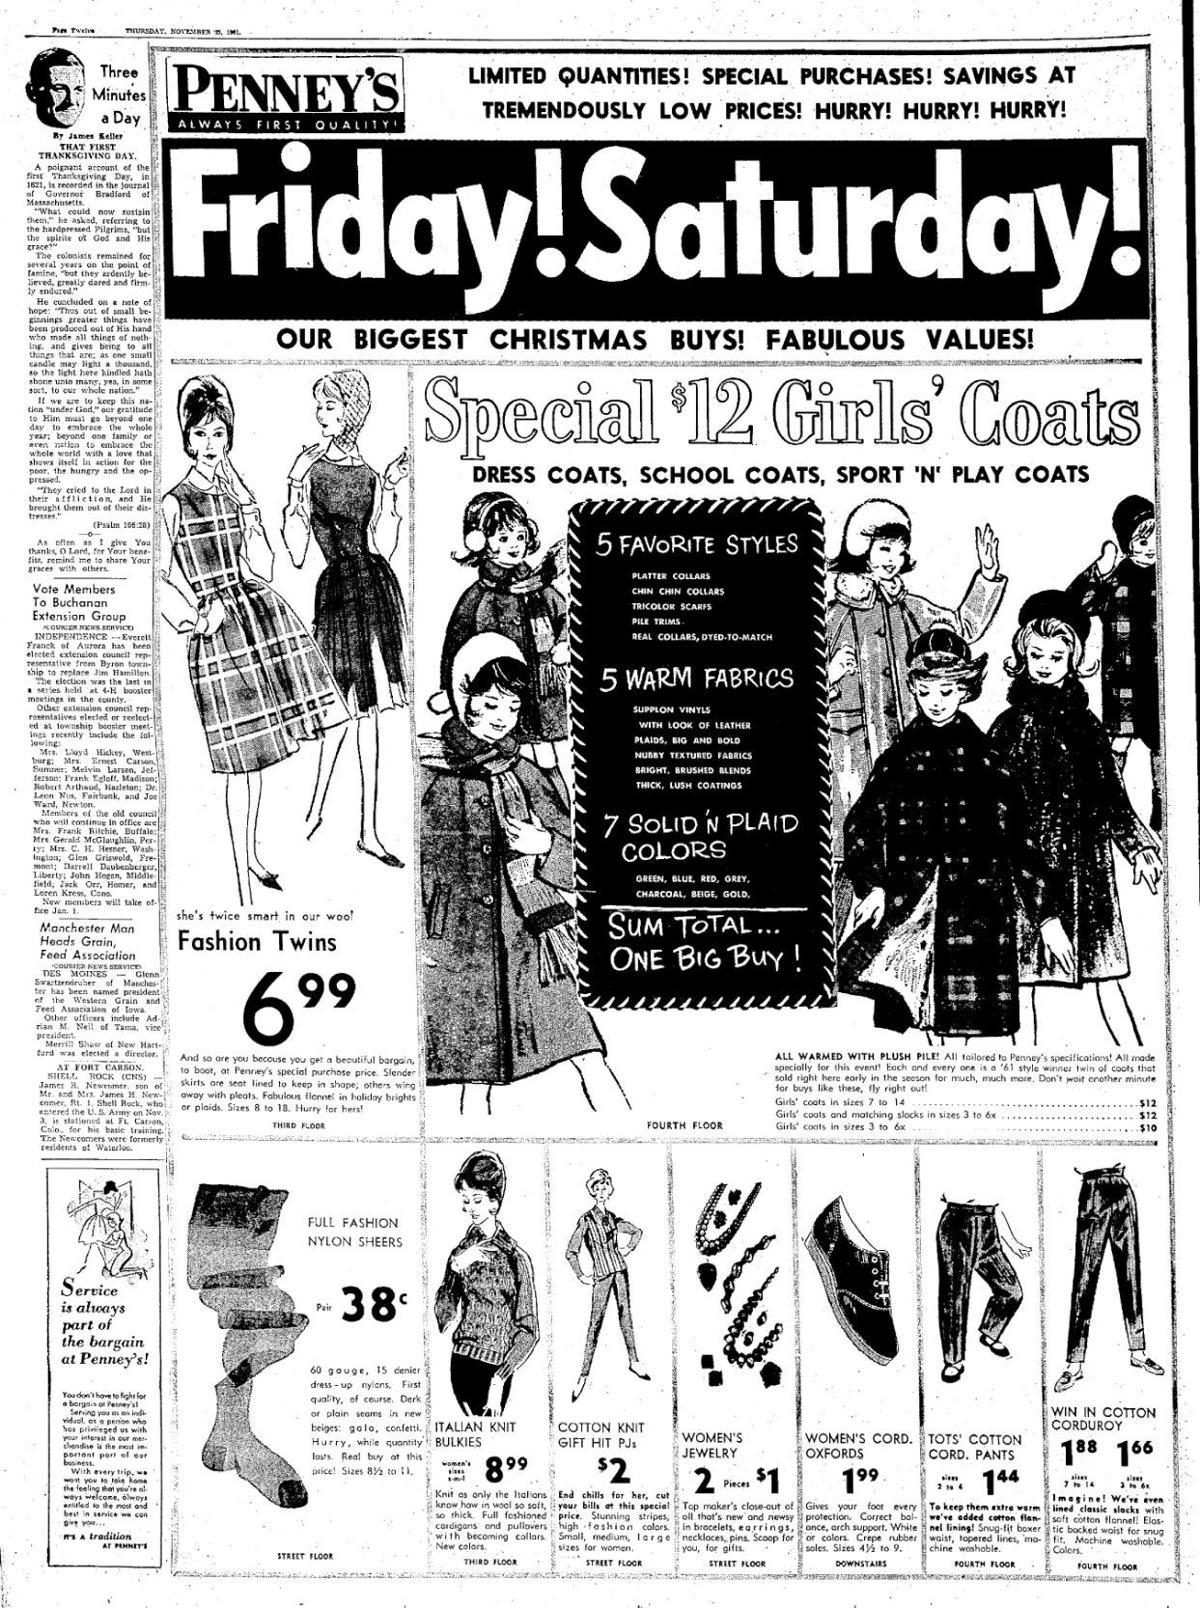 1961 JC Penney's ad